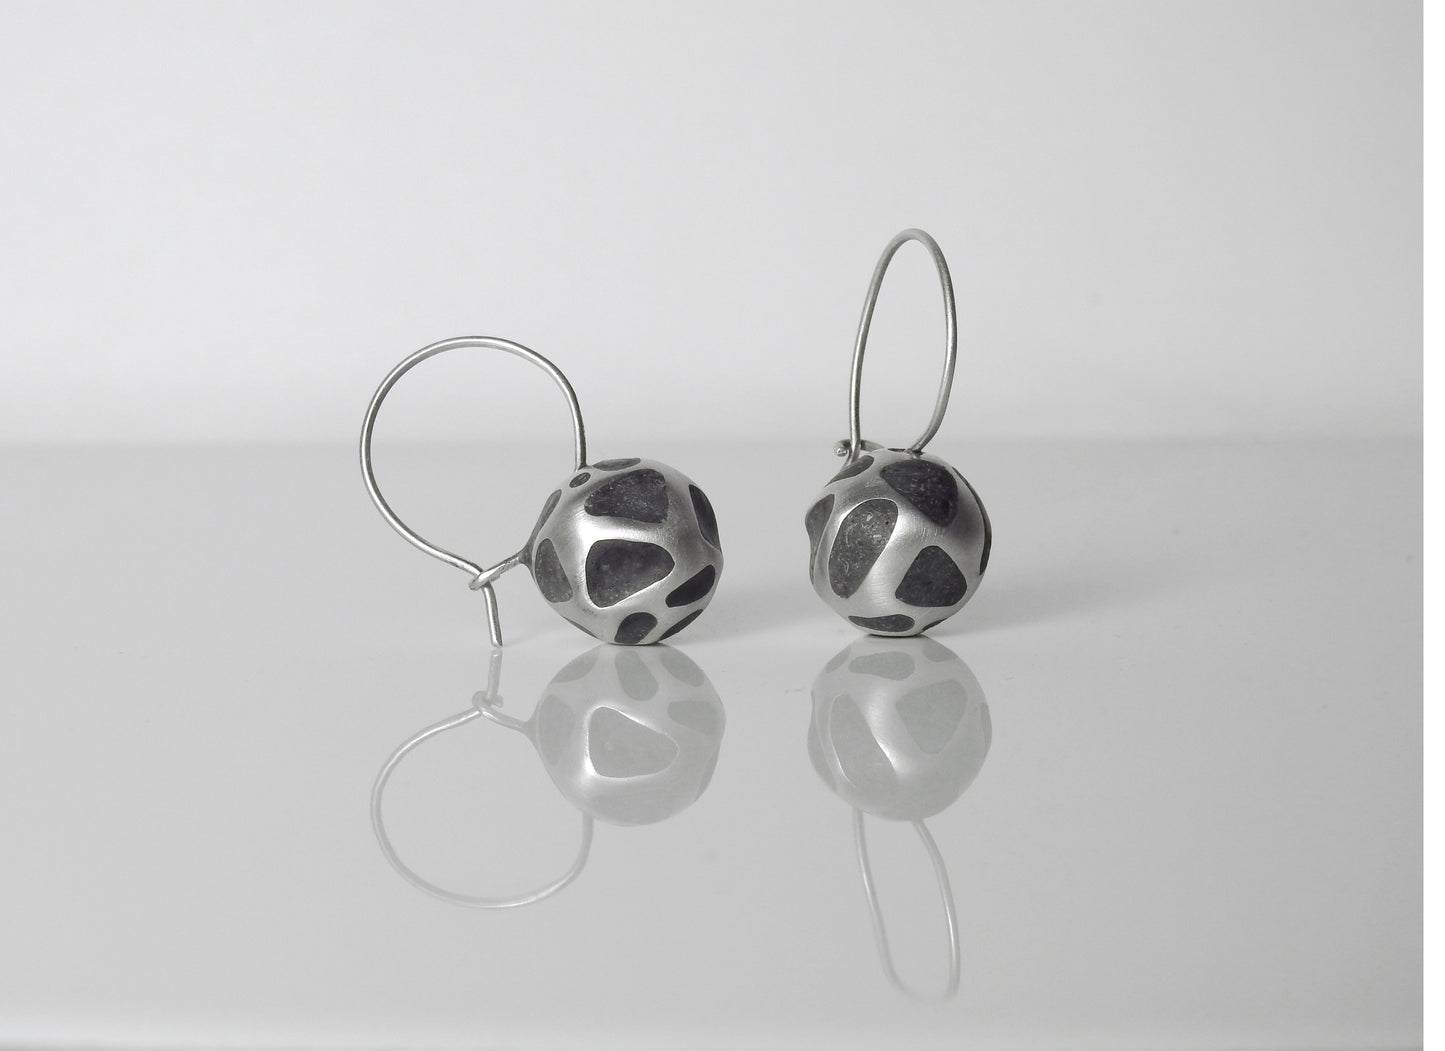 Sterling silver bauble earrings with round locking hoop style wires, very light with a great swing, by ZEALmetal, Nicole Horlor, in Kingston, ON Canada